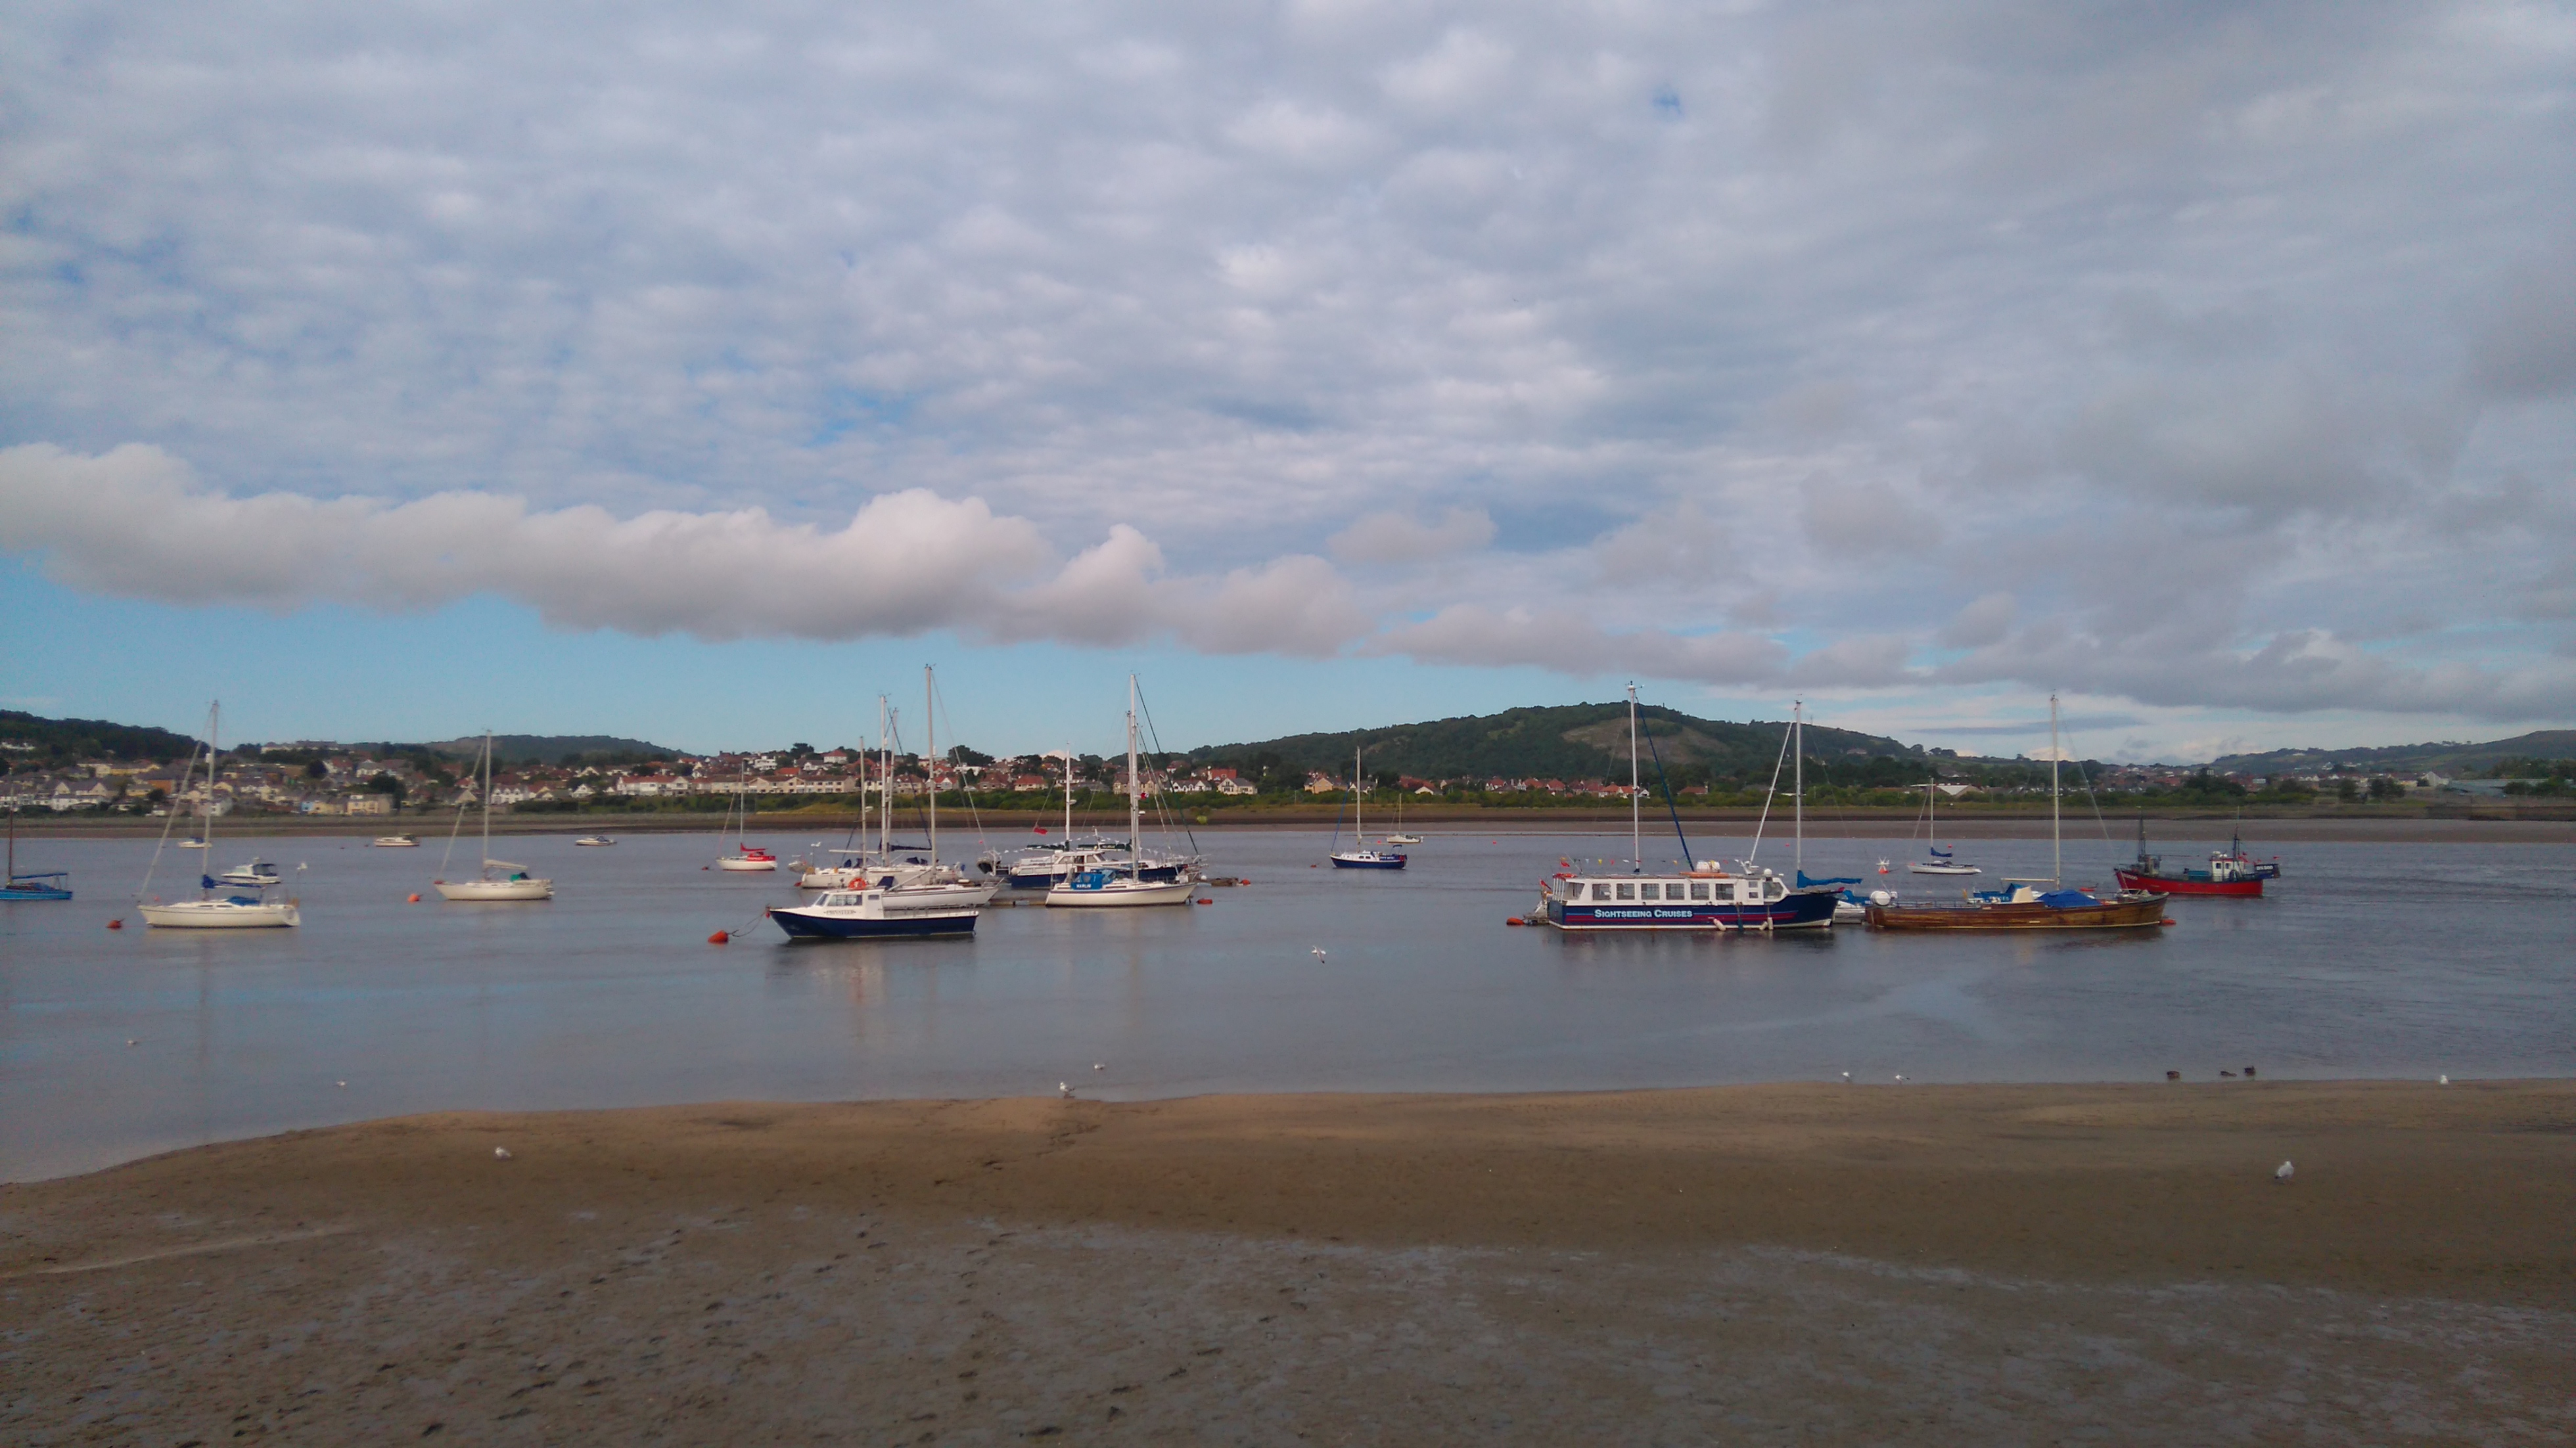 Boats moored to mooring buoys on the River Conwy with mudflats in the foreground. Llandudno Junction is visible in the background.